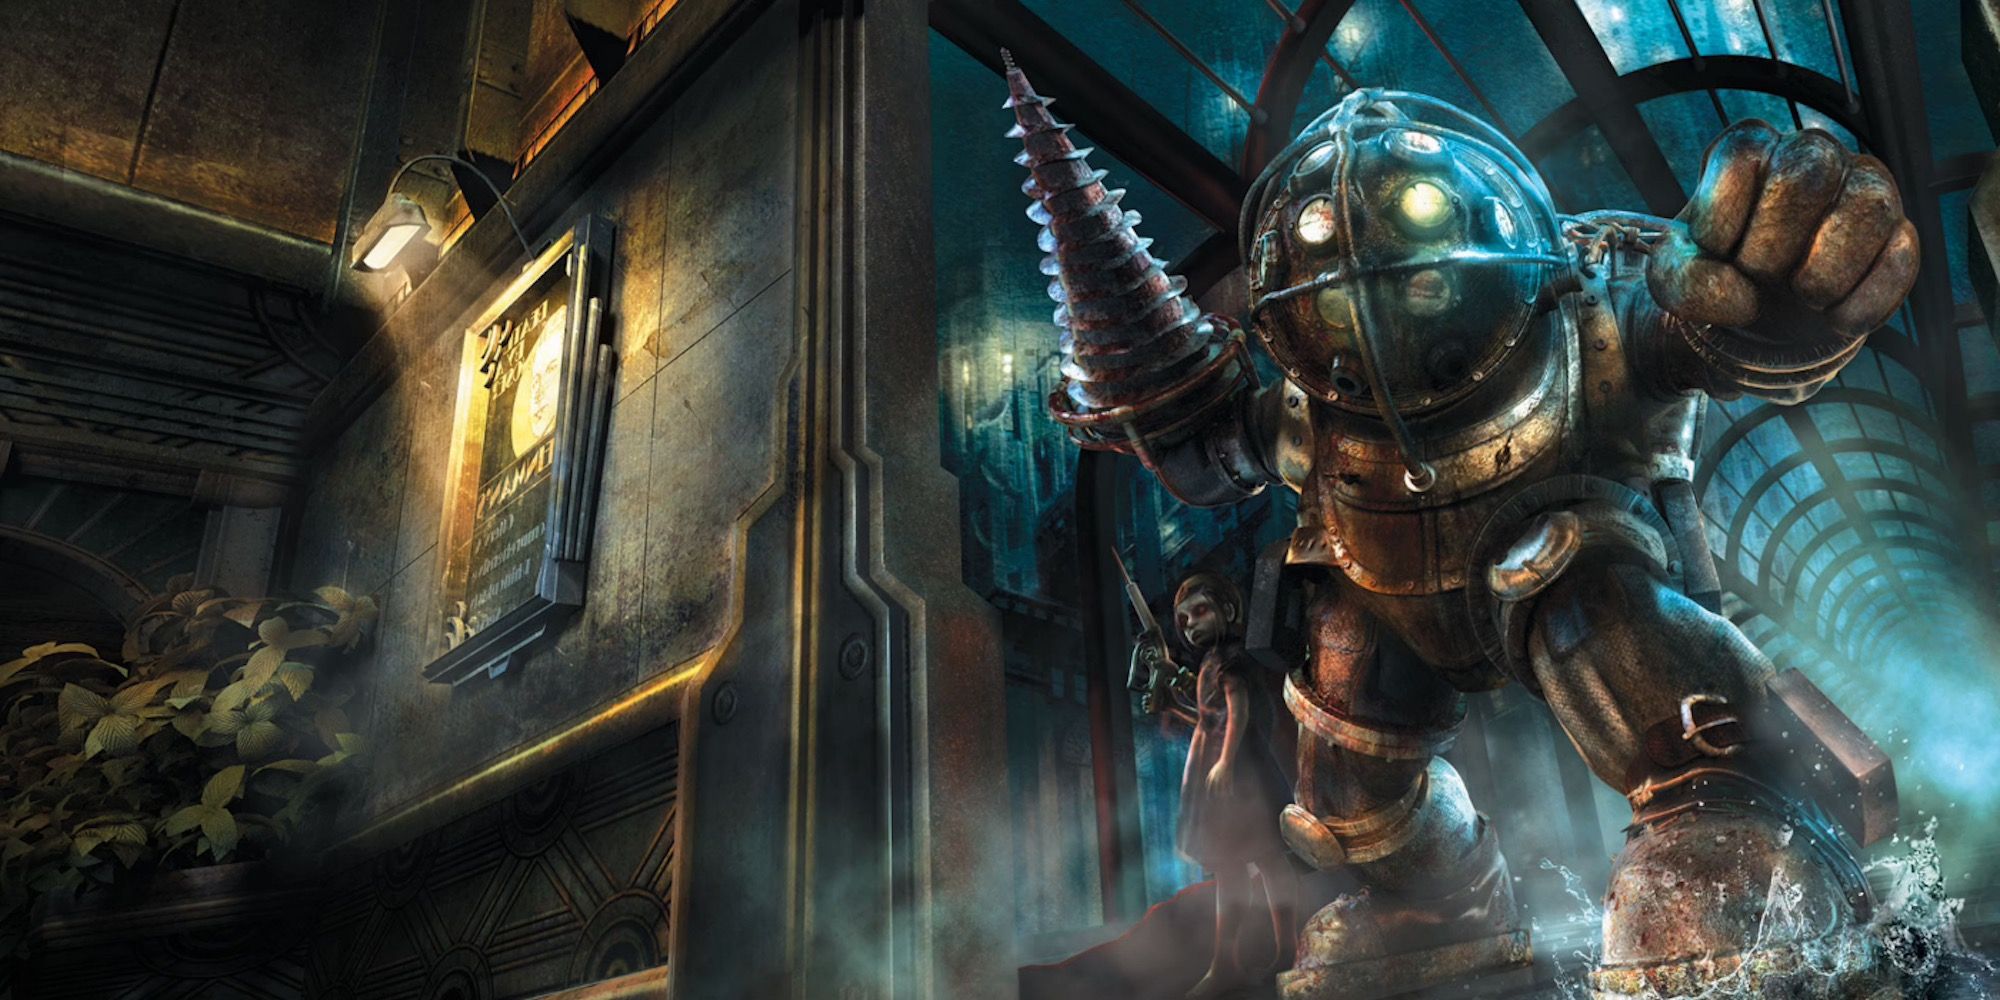 Promo art featuring characters in BioShock